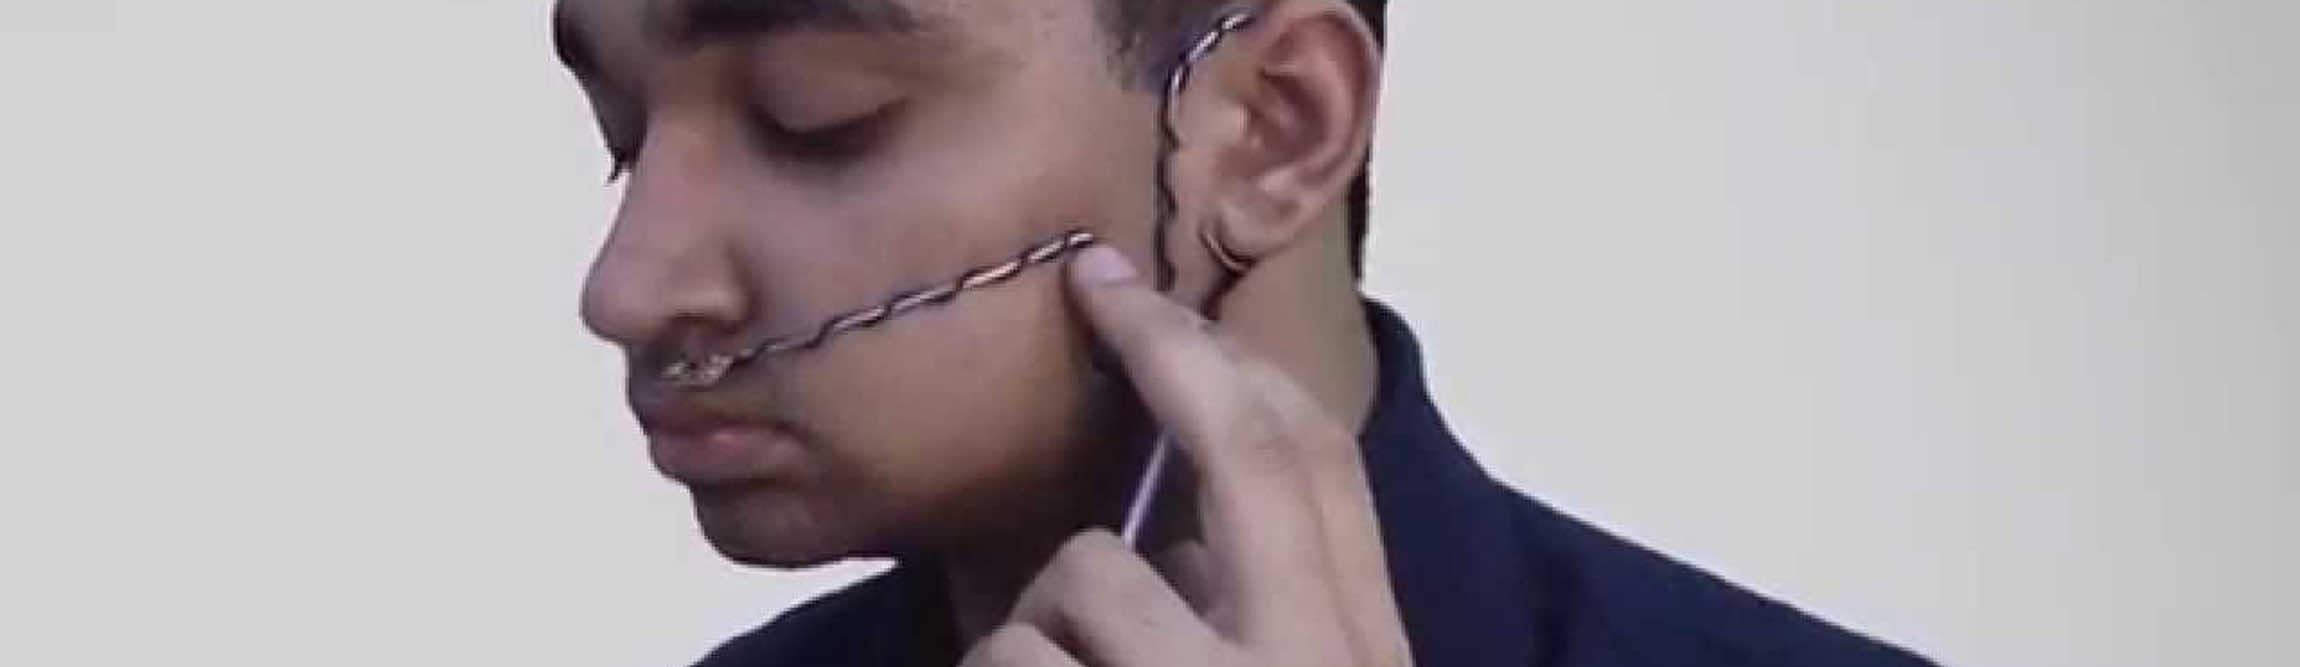 Indian Teenager Builds a Breath-to-Voice Device – TALK – Costs only $80